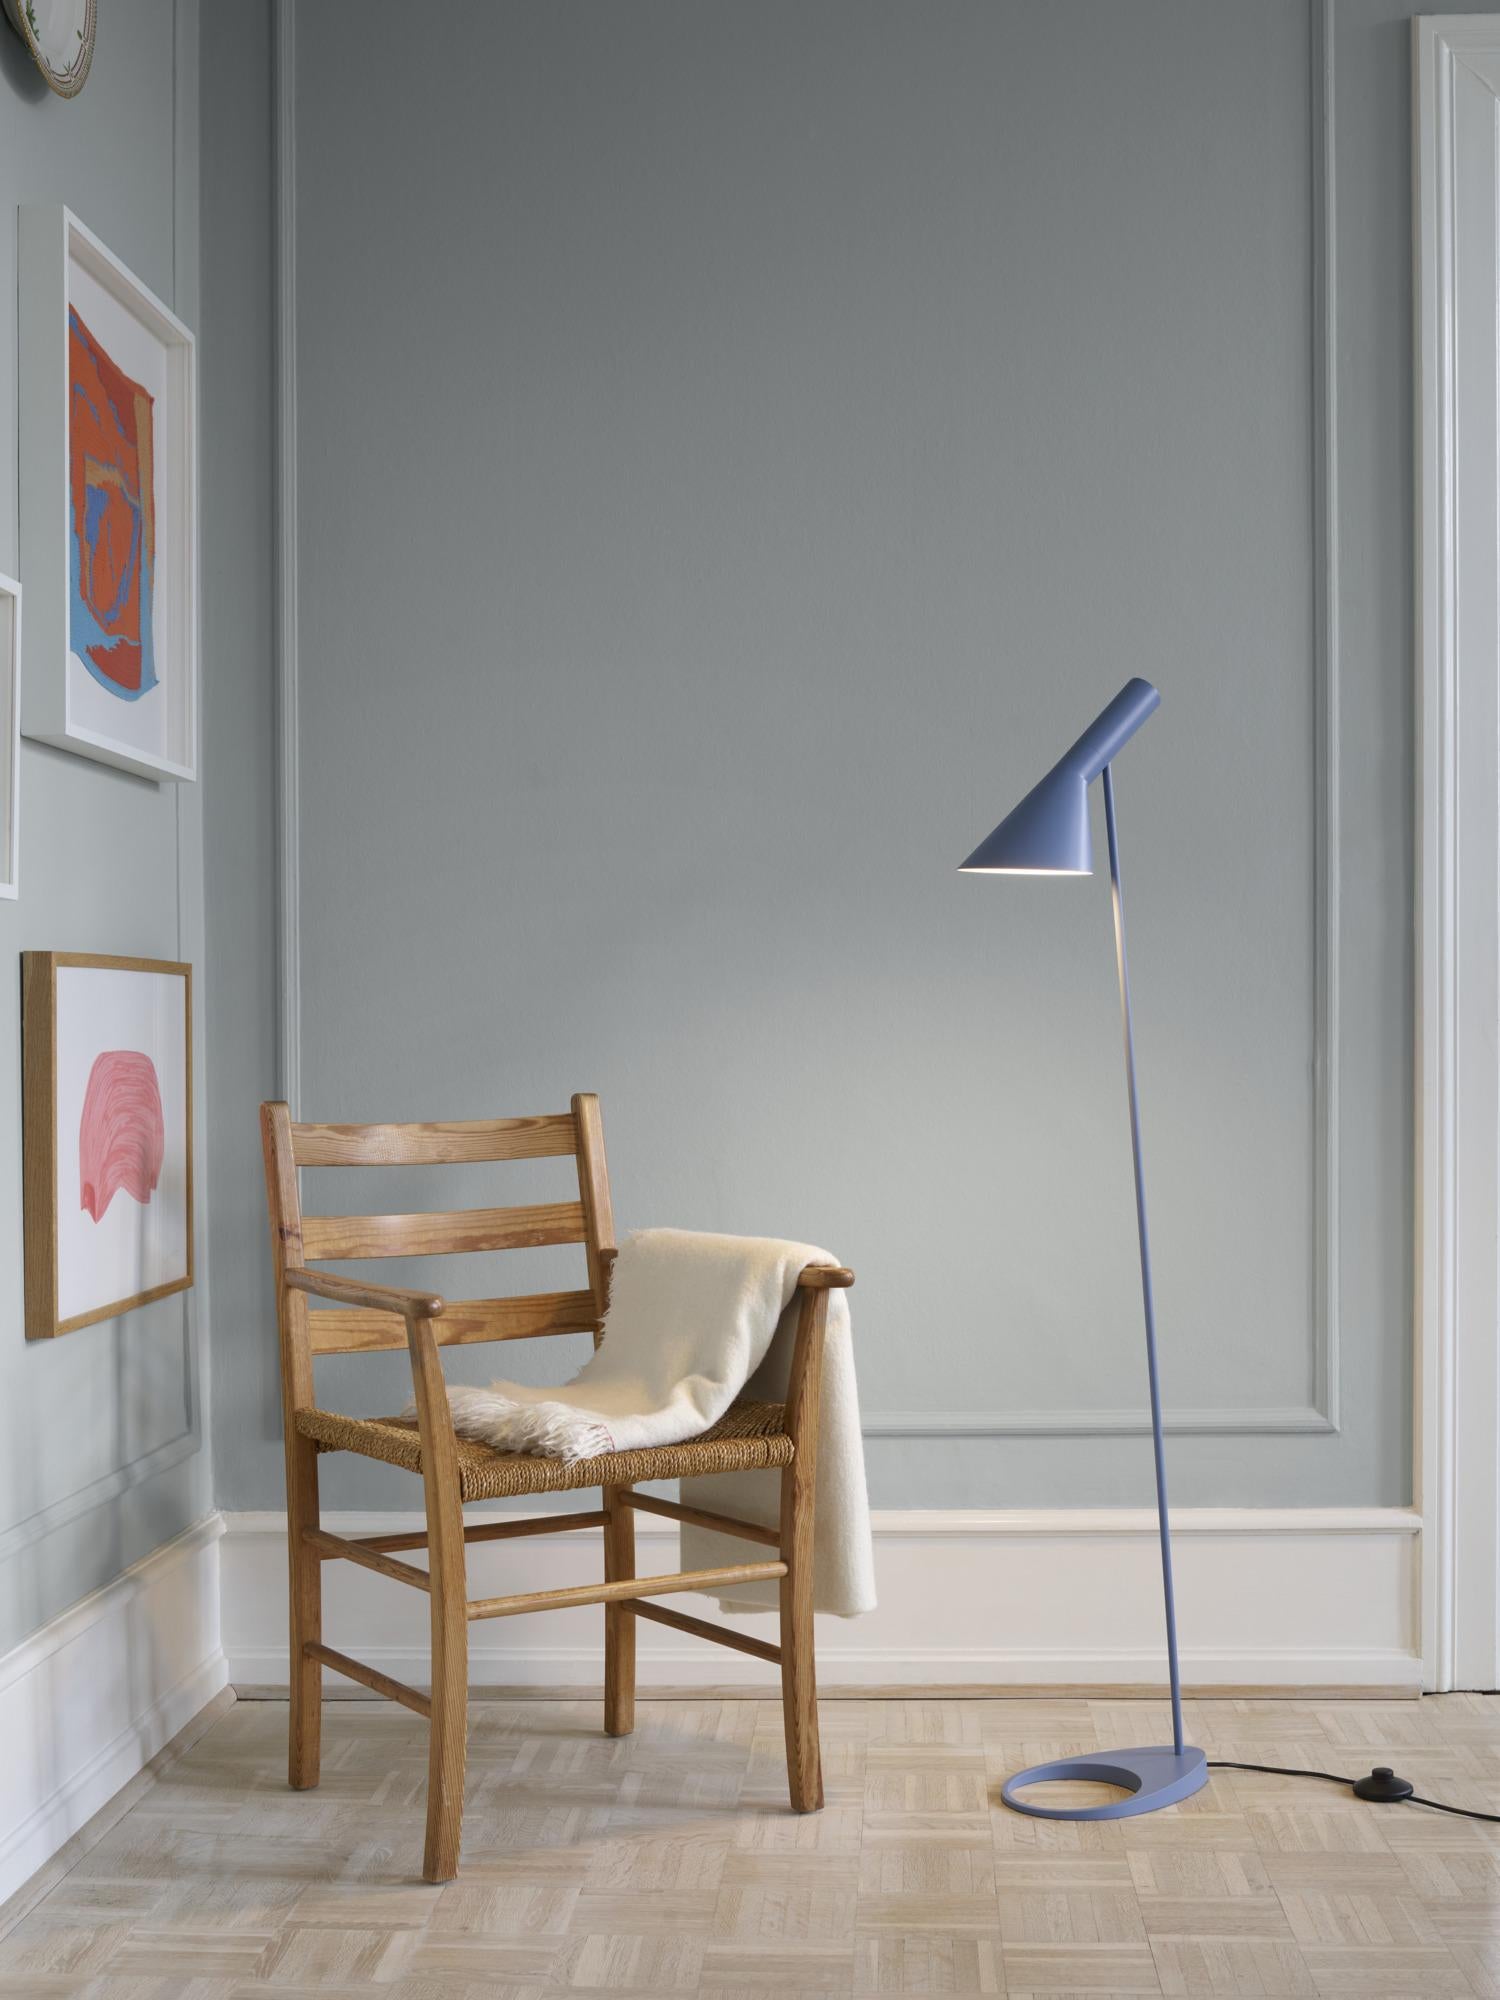 Arne Jacobsen AJ Floor Lamp in Dusty Blue for Louis Poulsen.

The AJ series was part of the lighting collection renowned Danish designer Arne Jacobsen created for the original SAS Royal Hotel in 1957. Today, his furniture and lighting designs are